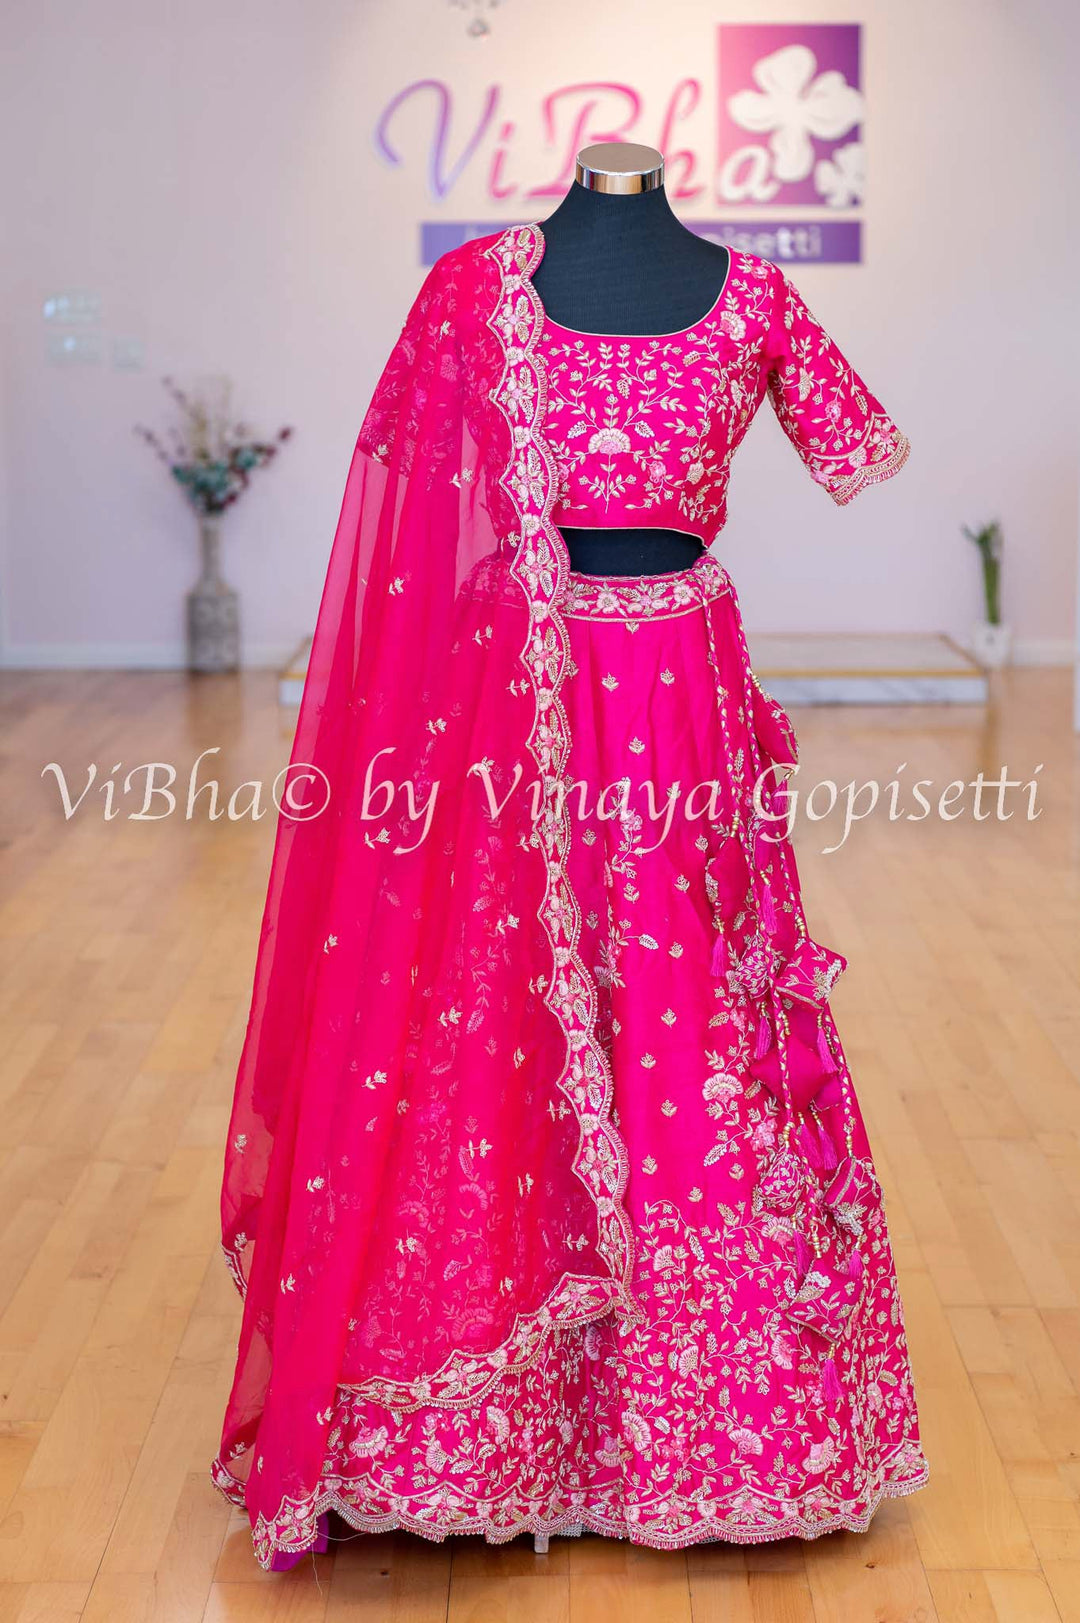 Accessories & Jewelry - Dark Pink Raw Silk Lehenga Blouse With Resham And Zardosi Embroidery With Scalloped Borders And Net Dupatta